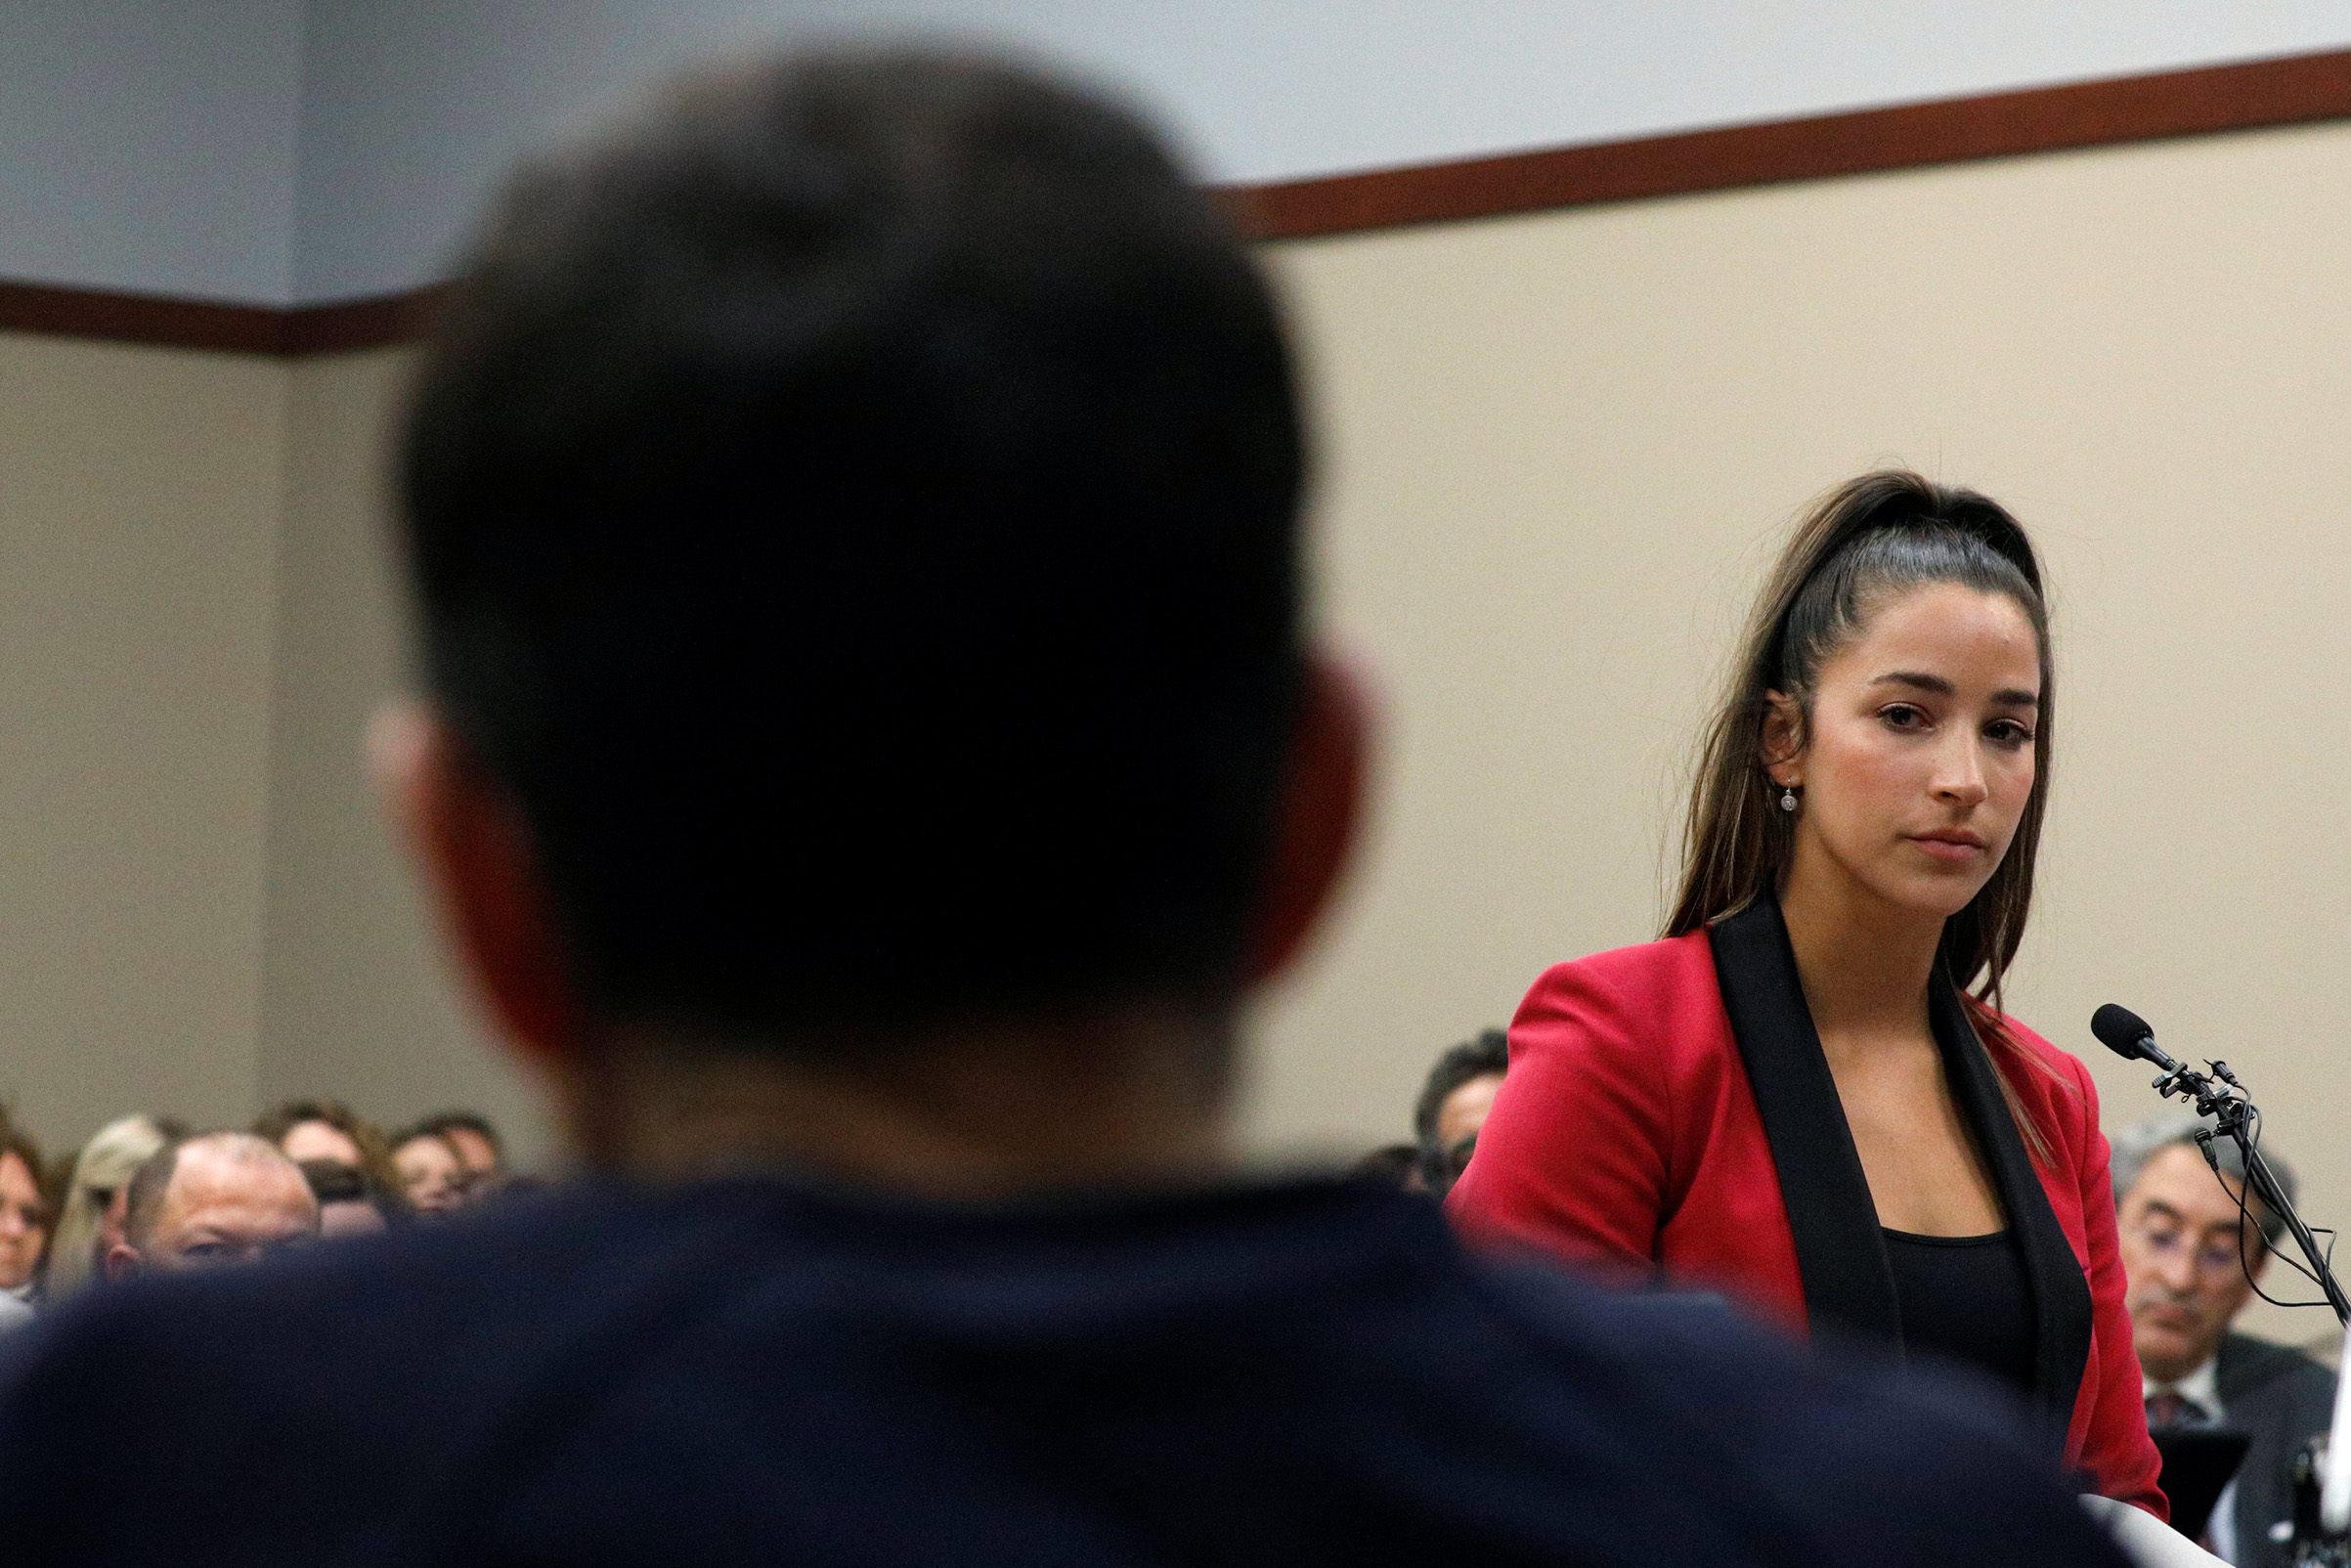 Victim and former gymnast Aly Raisman speaks at the sentencing hearing for Larry Nassar, (R) a former team USA Gymnastics doctor who pleaded guilty in November 2017 to sexual assault charges, in Lansing